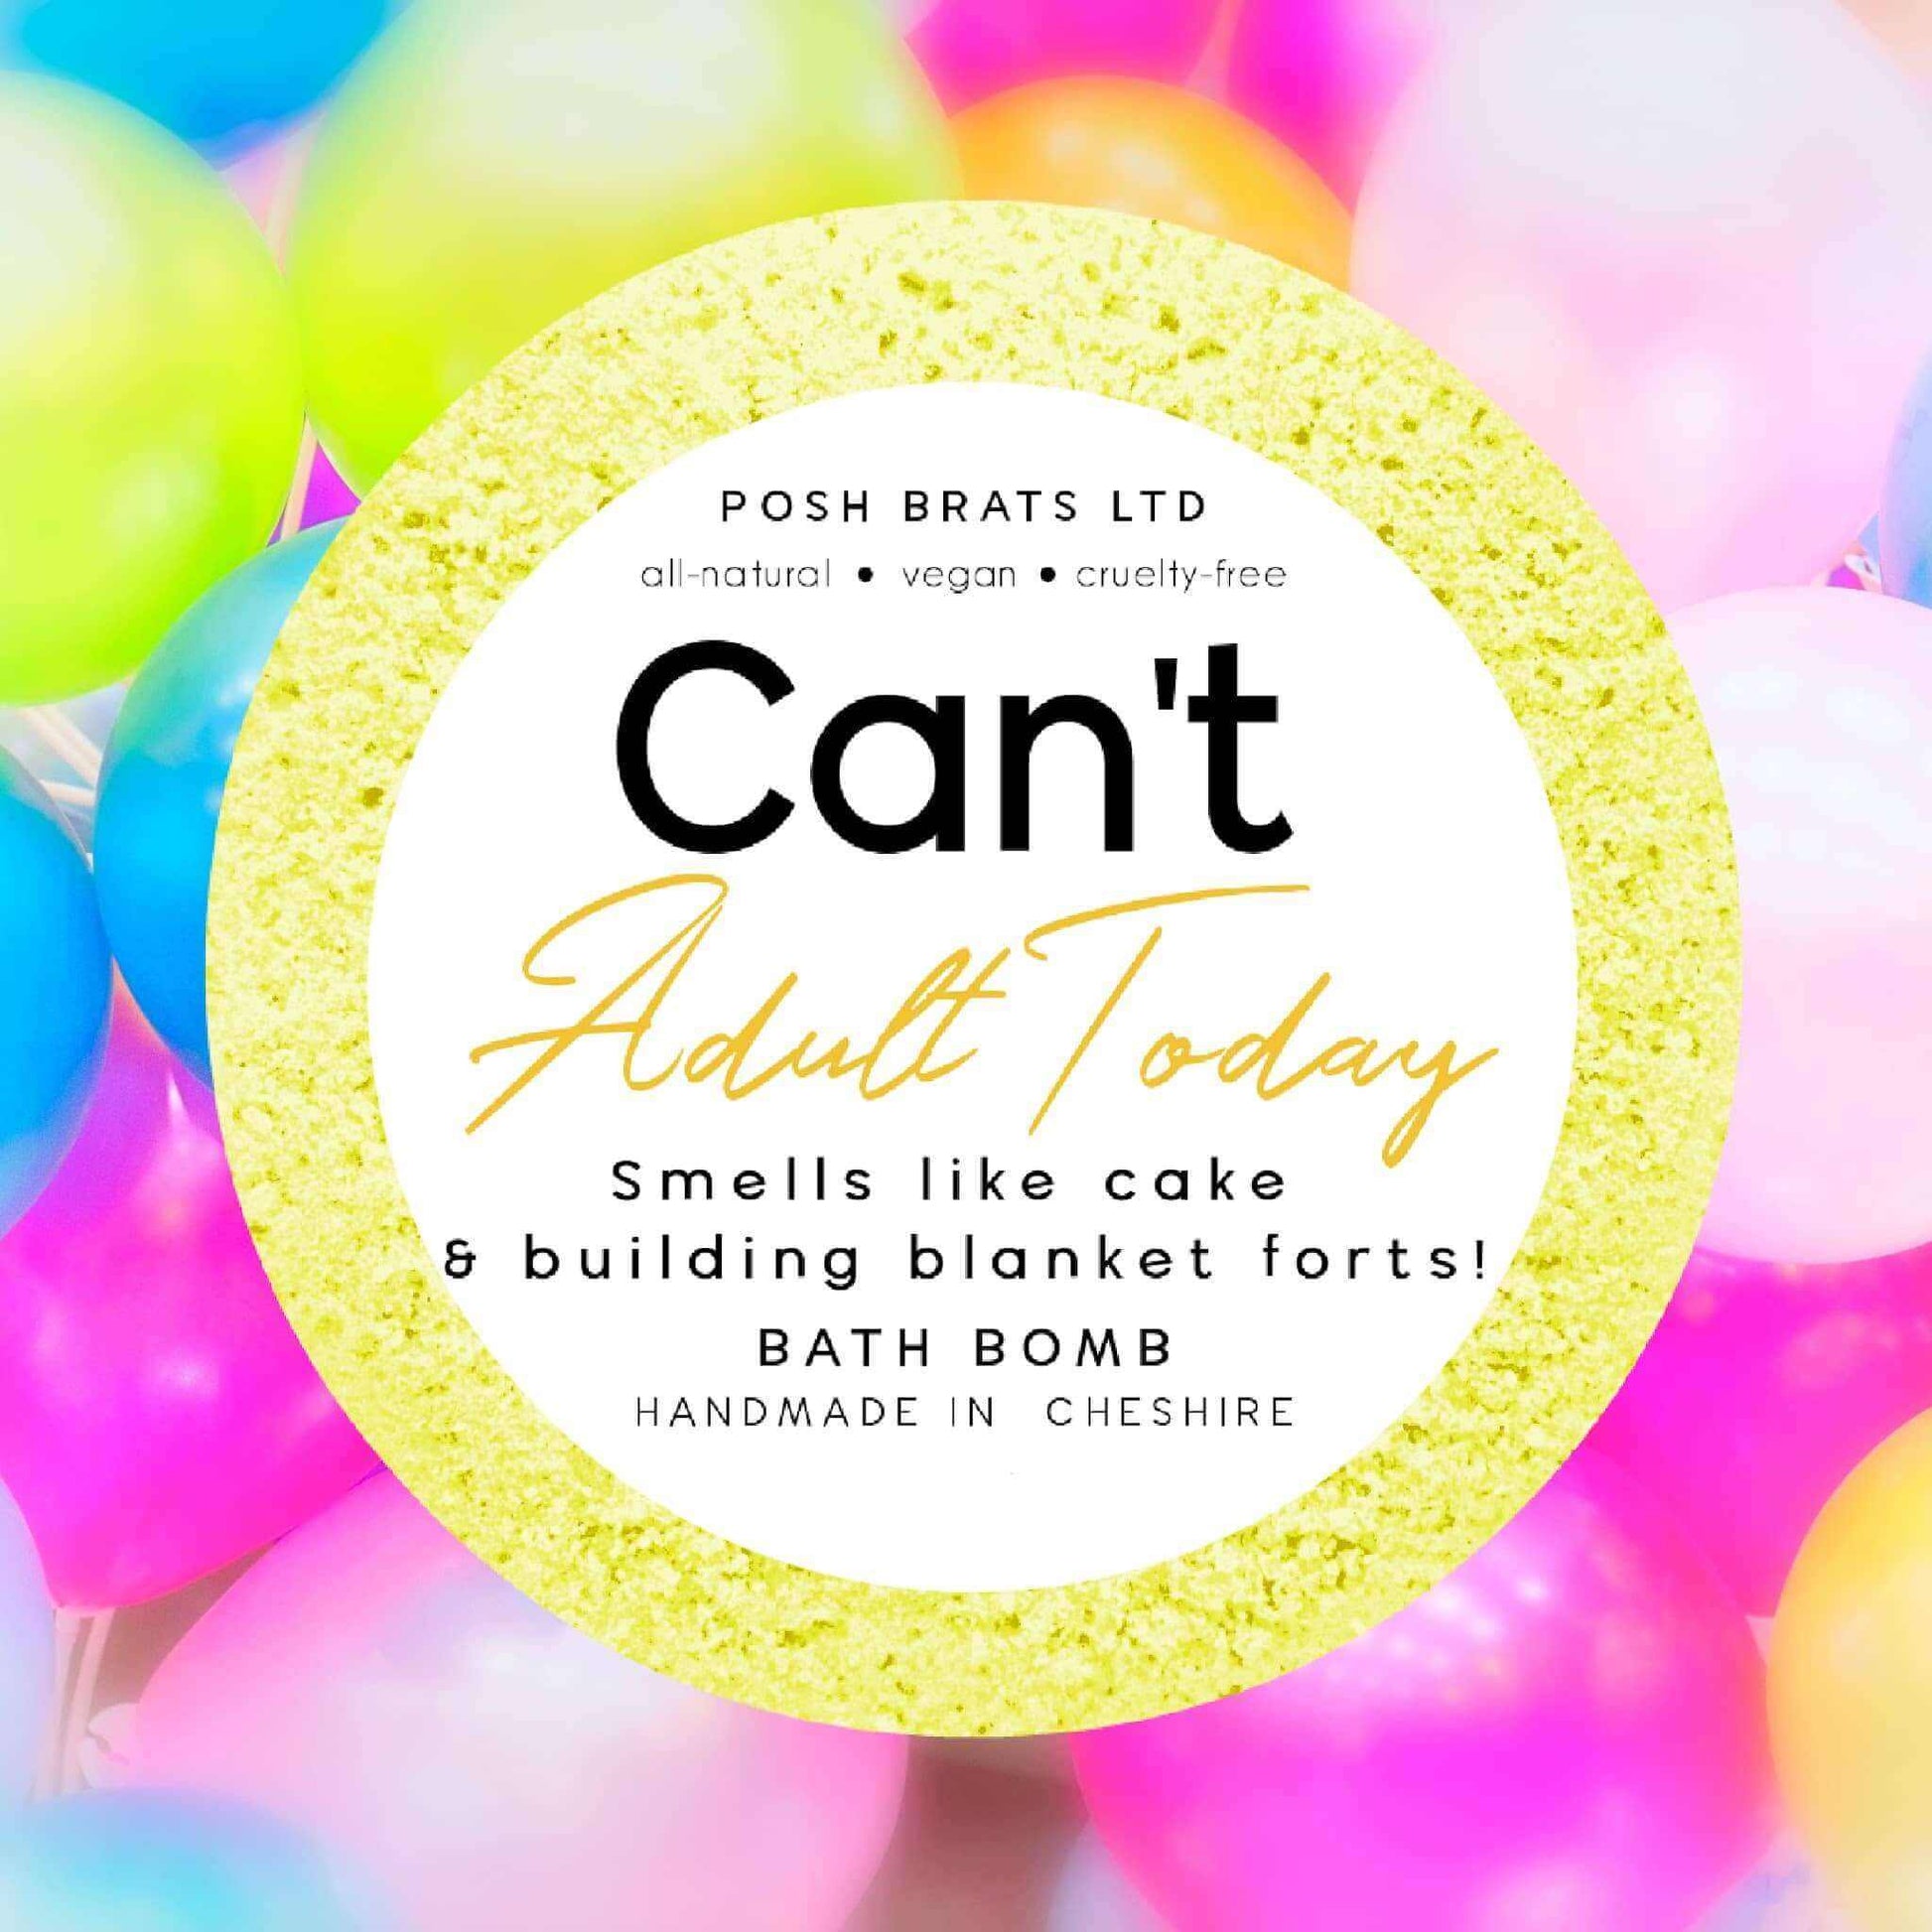 Relax, refresh, recharge with our Can't Adult Today Fizzy Bath Bomb. Make your bath time special.